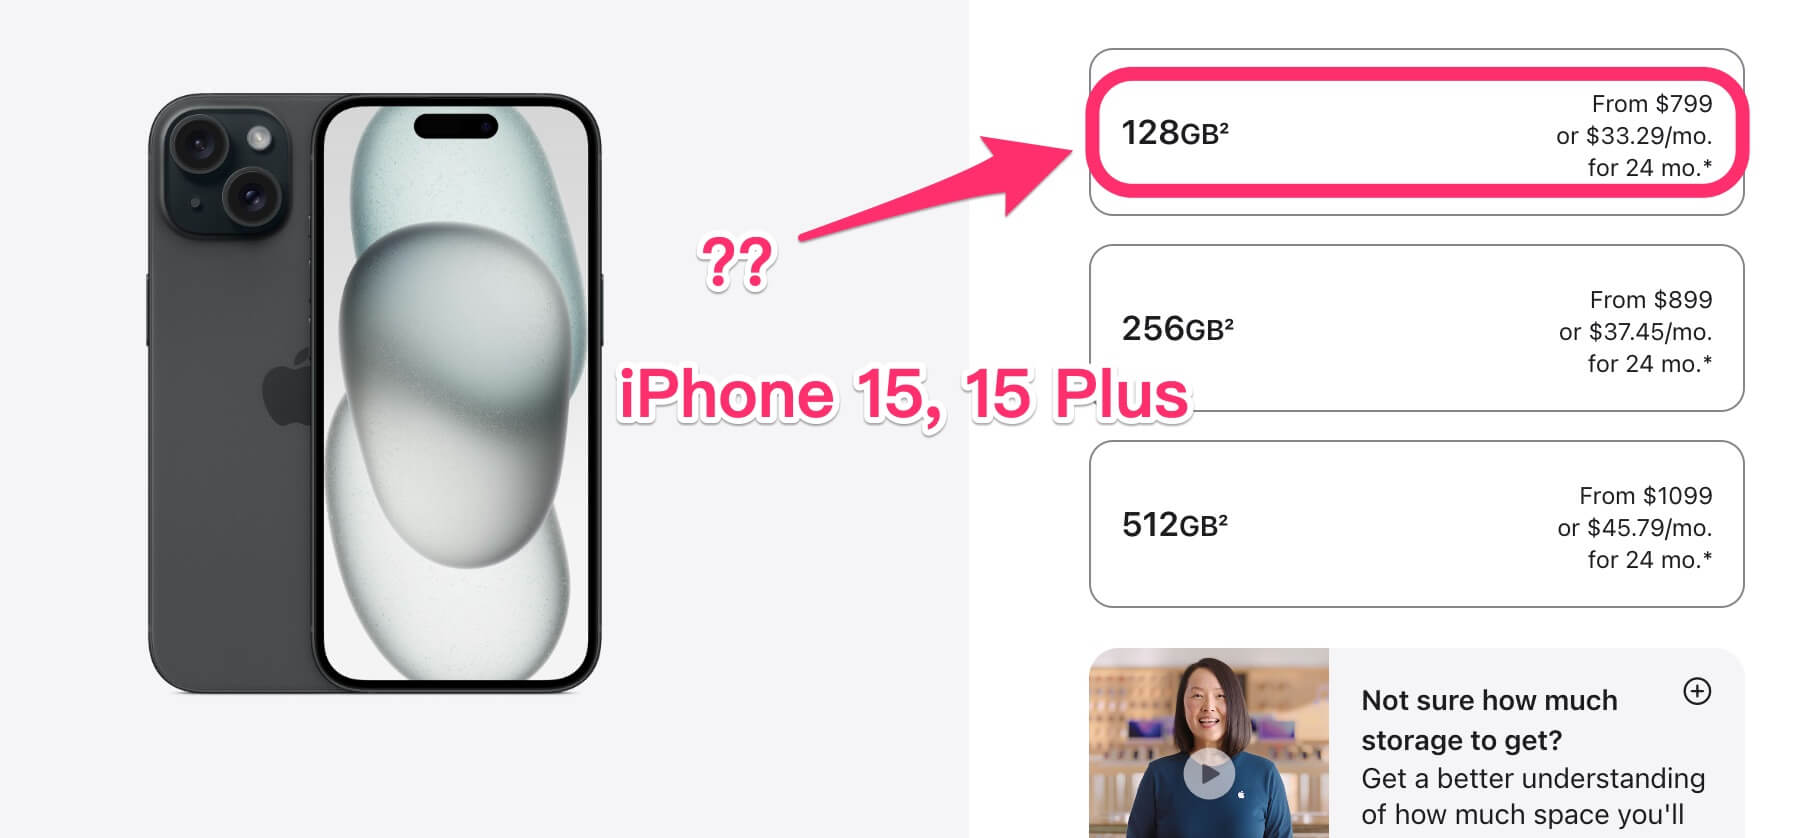 Is 128GB Enough for iPhone 15 or iPhone 15 Plus?